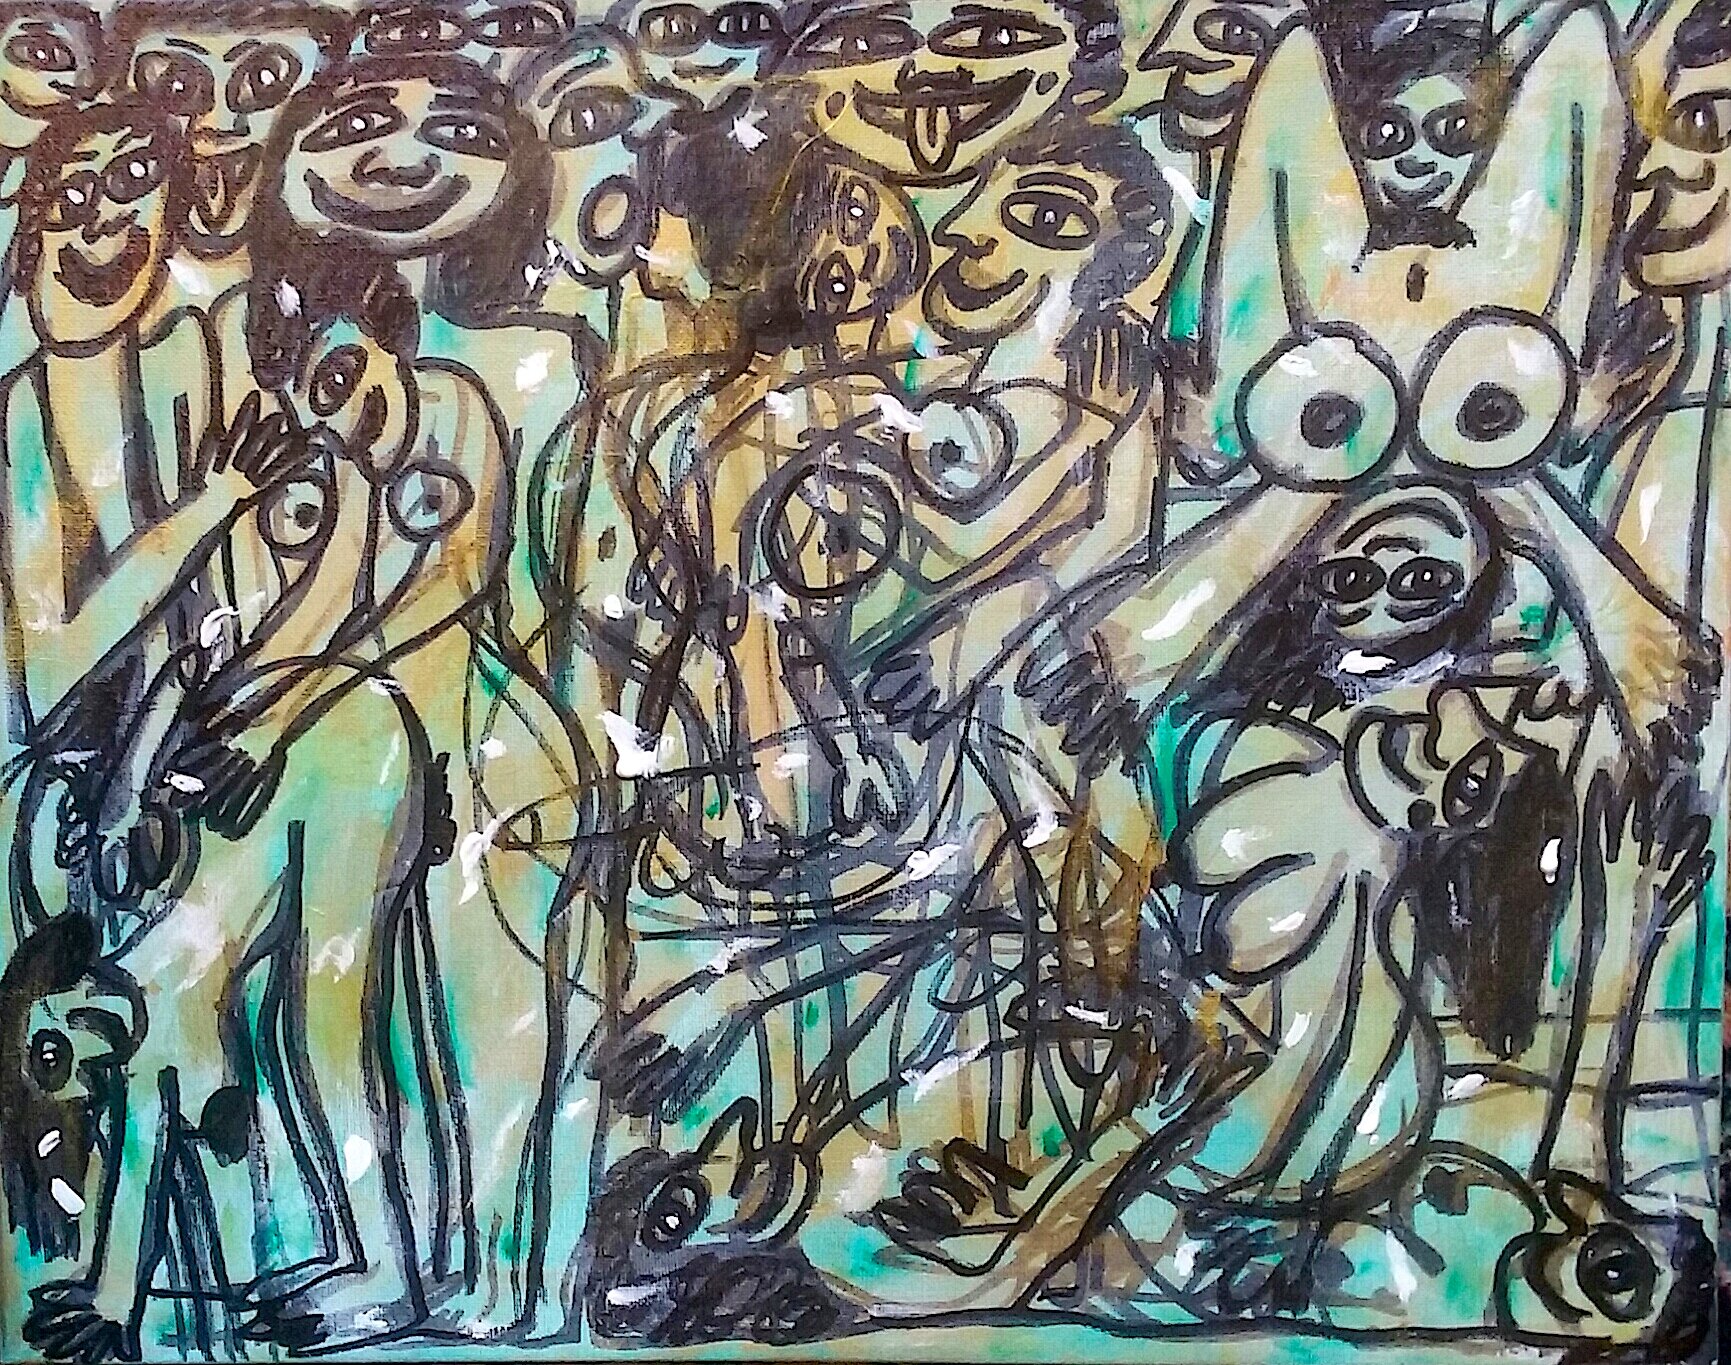 Boogie Nights, 2019. Oil, acrylic, ink on canvas. 16" x 20”.